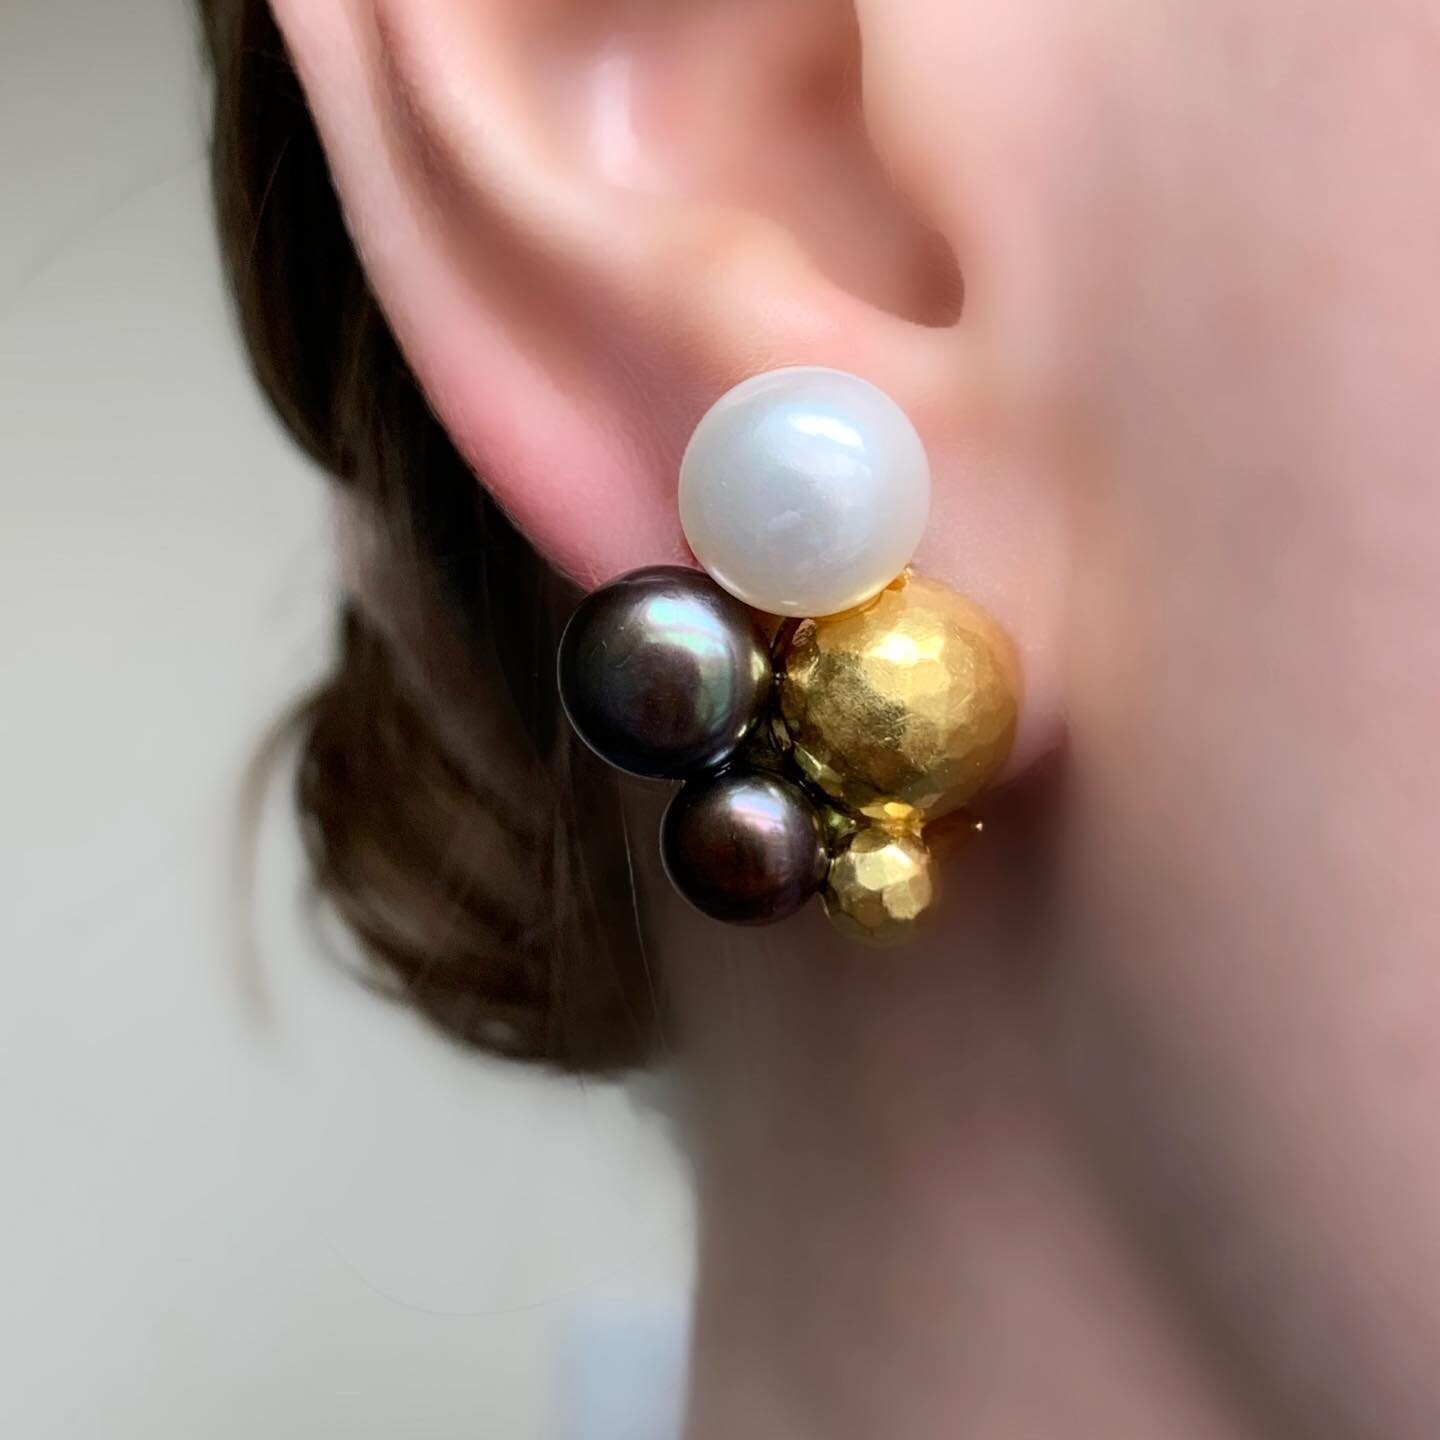 Estate 18k Yellow Gold Textured Bubble Climber Earring w/ Freshwater Pearls &amp; Omega Style Backs 

DM to inquire

810-03644